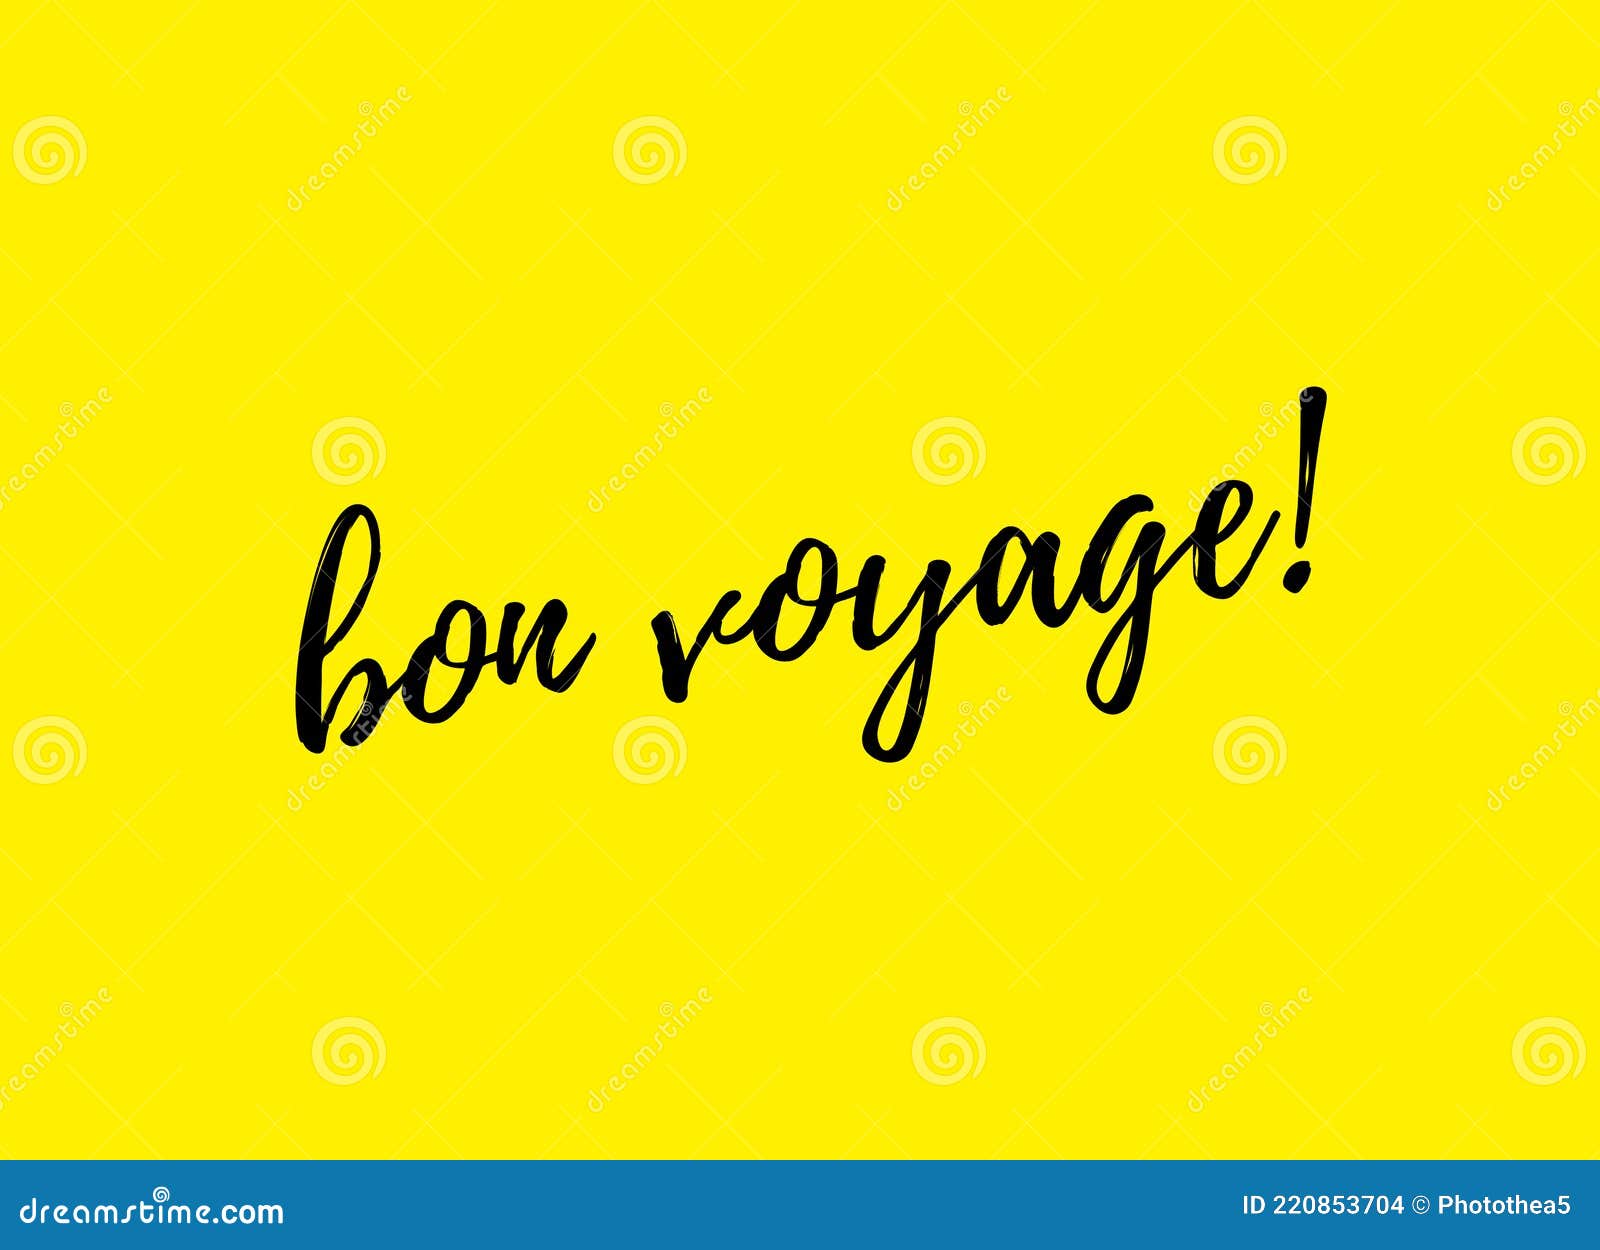 bon voyage is french word